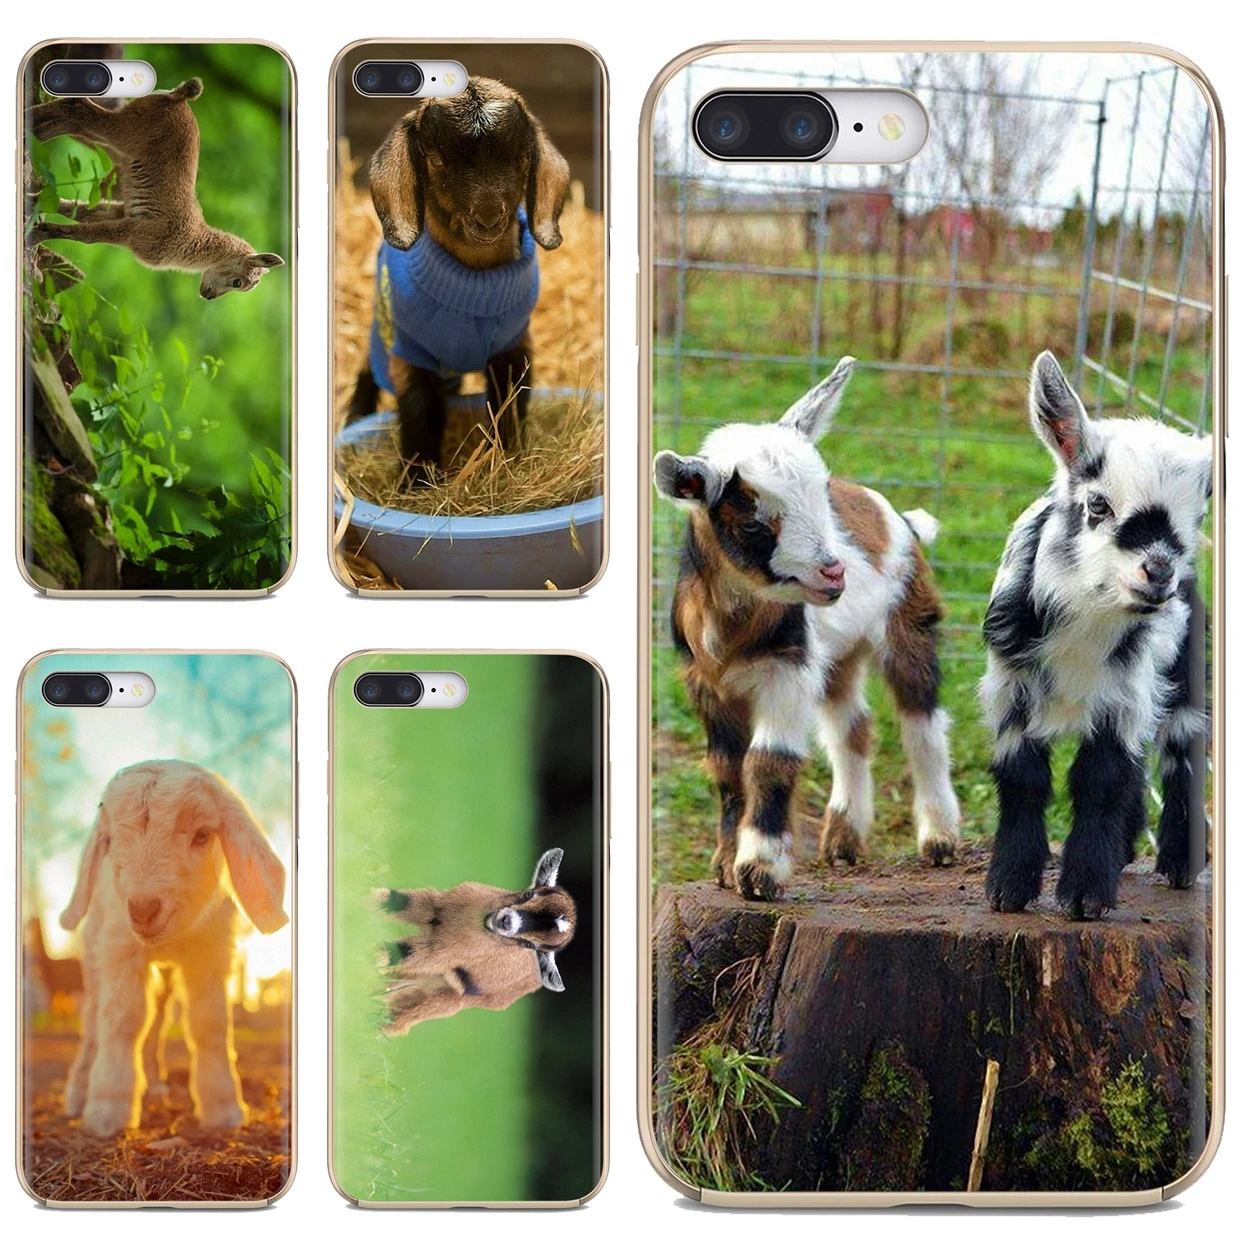 The Cutest Baby Pygmy Goat Wallpaper Soft Cover For iPhone iPod Touch 11 12  Pro 4 4S 5 5S SE 5C 6 6S 7 8 X XR XS Plus Max 2020|Phone Case & Covers| -  AliExpress